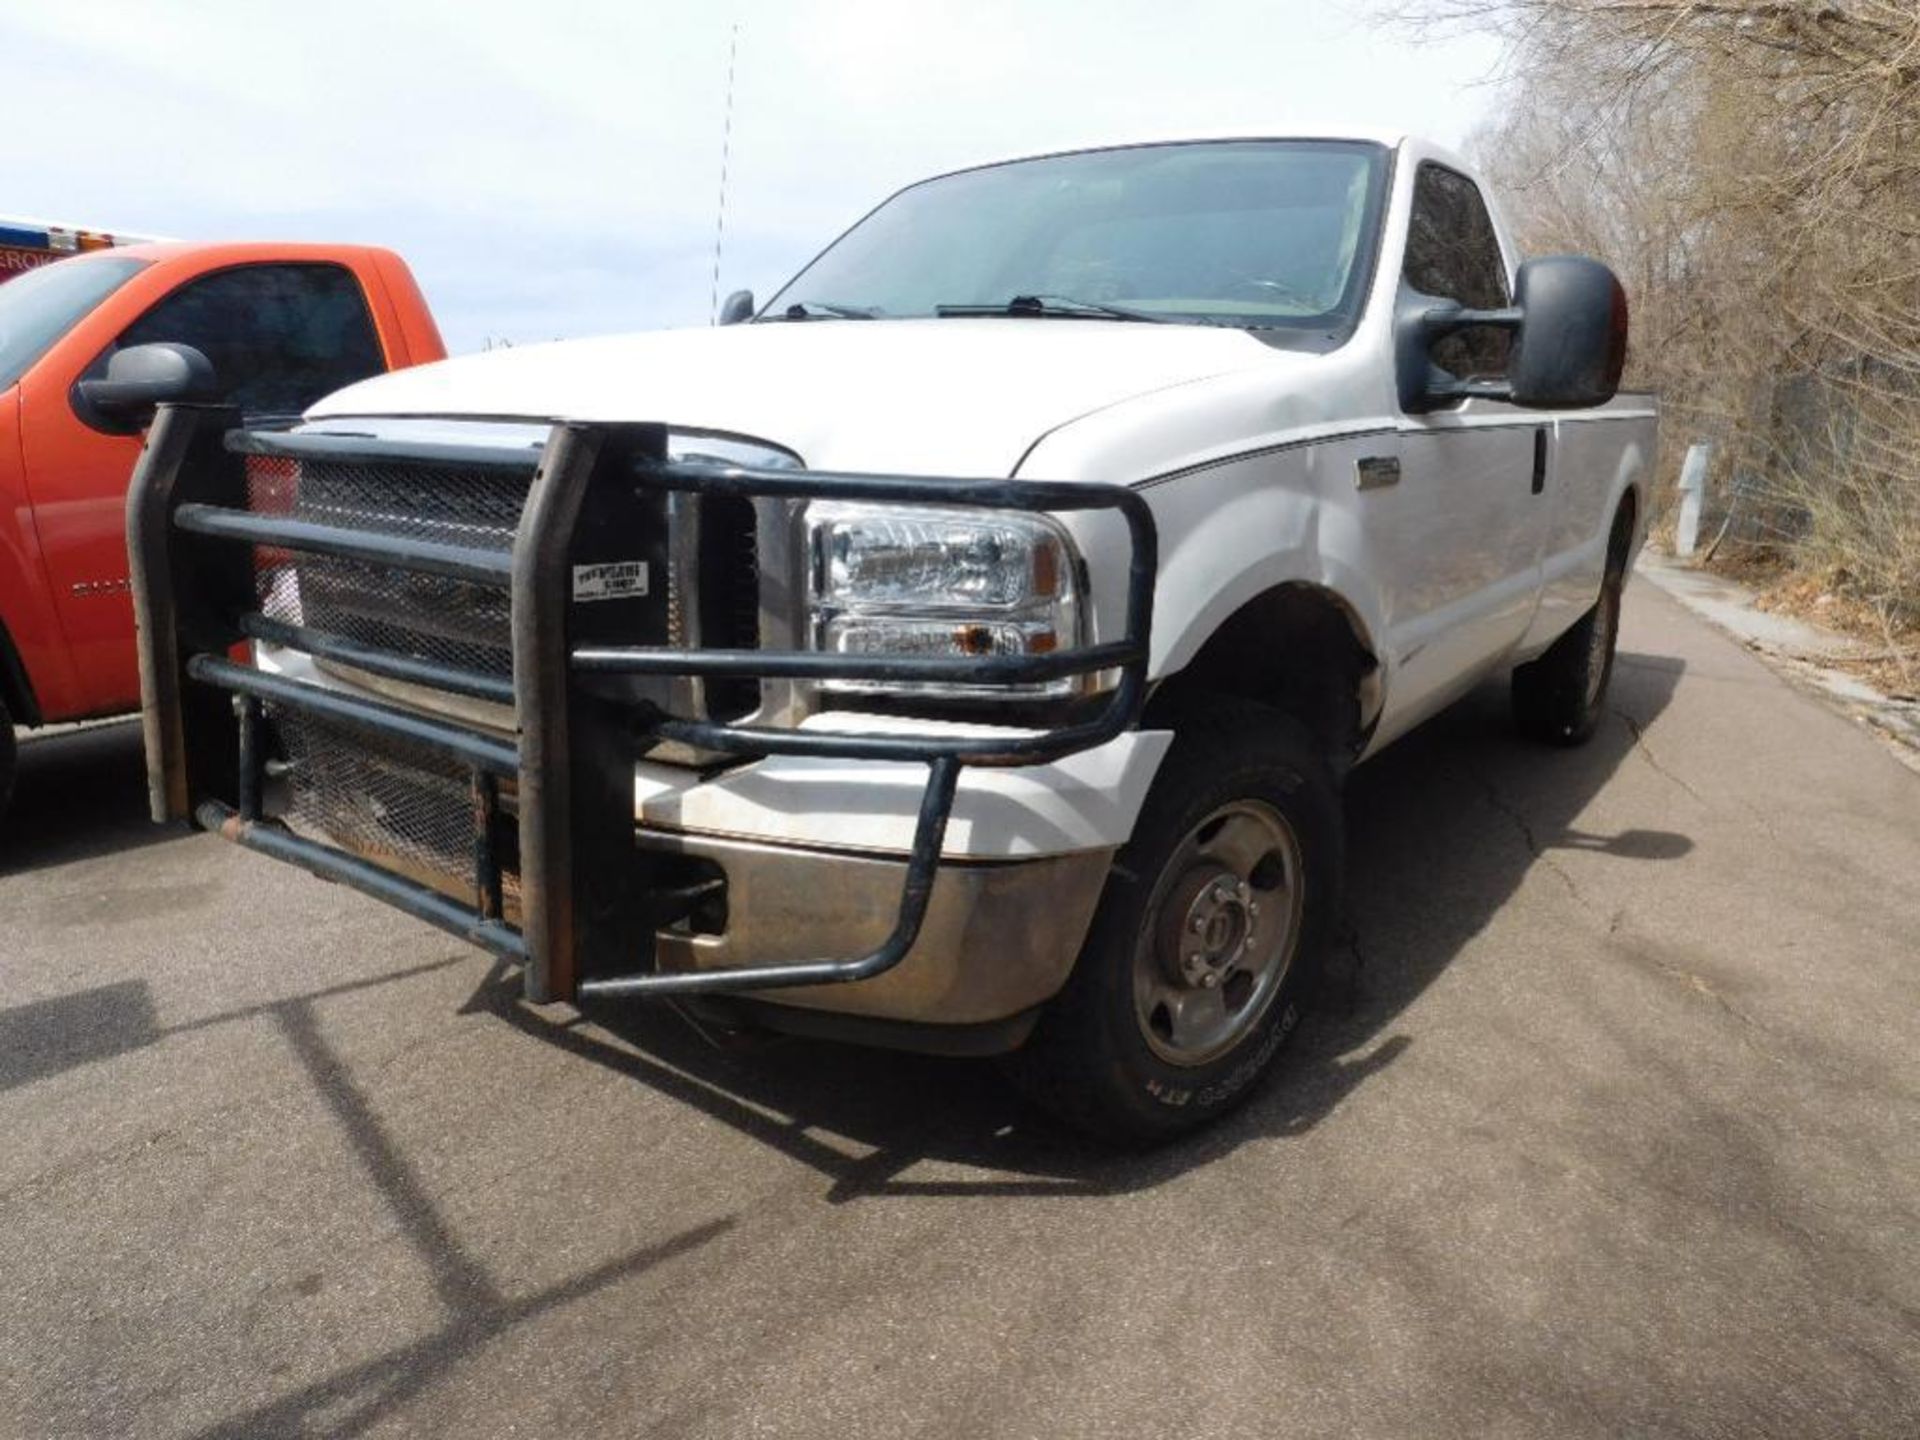 2006 Ford F250 4x4 Pickup s/n 1ftnf215776ed38260, 5.4 gas eng, manual trans,od reads 159816 miles - Image 2 of 3